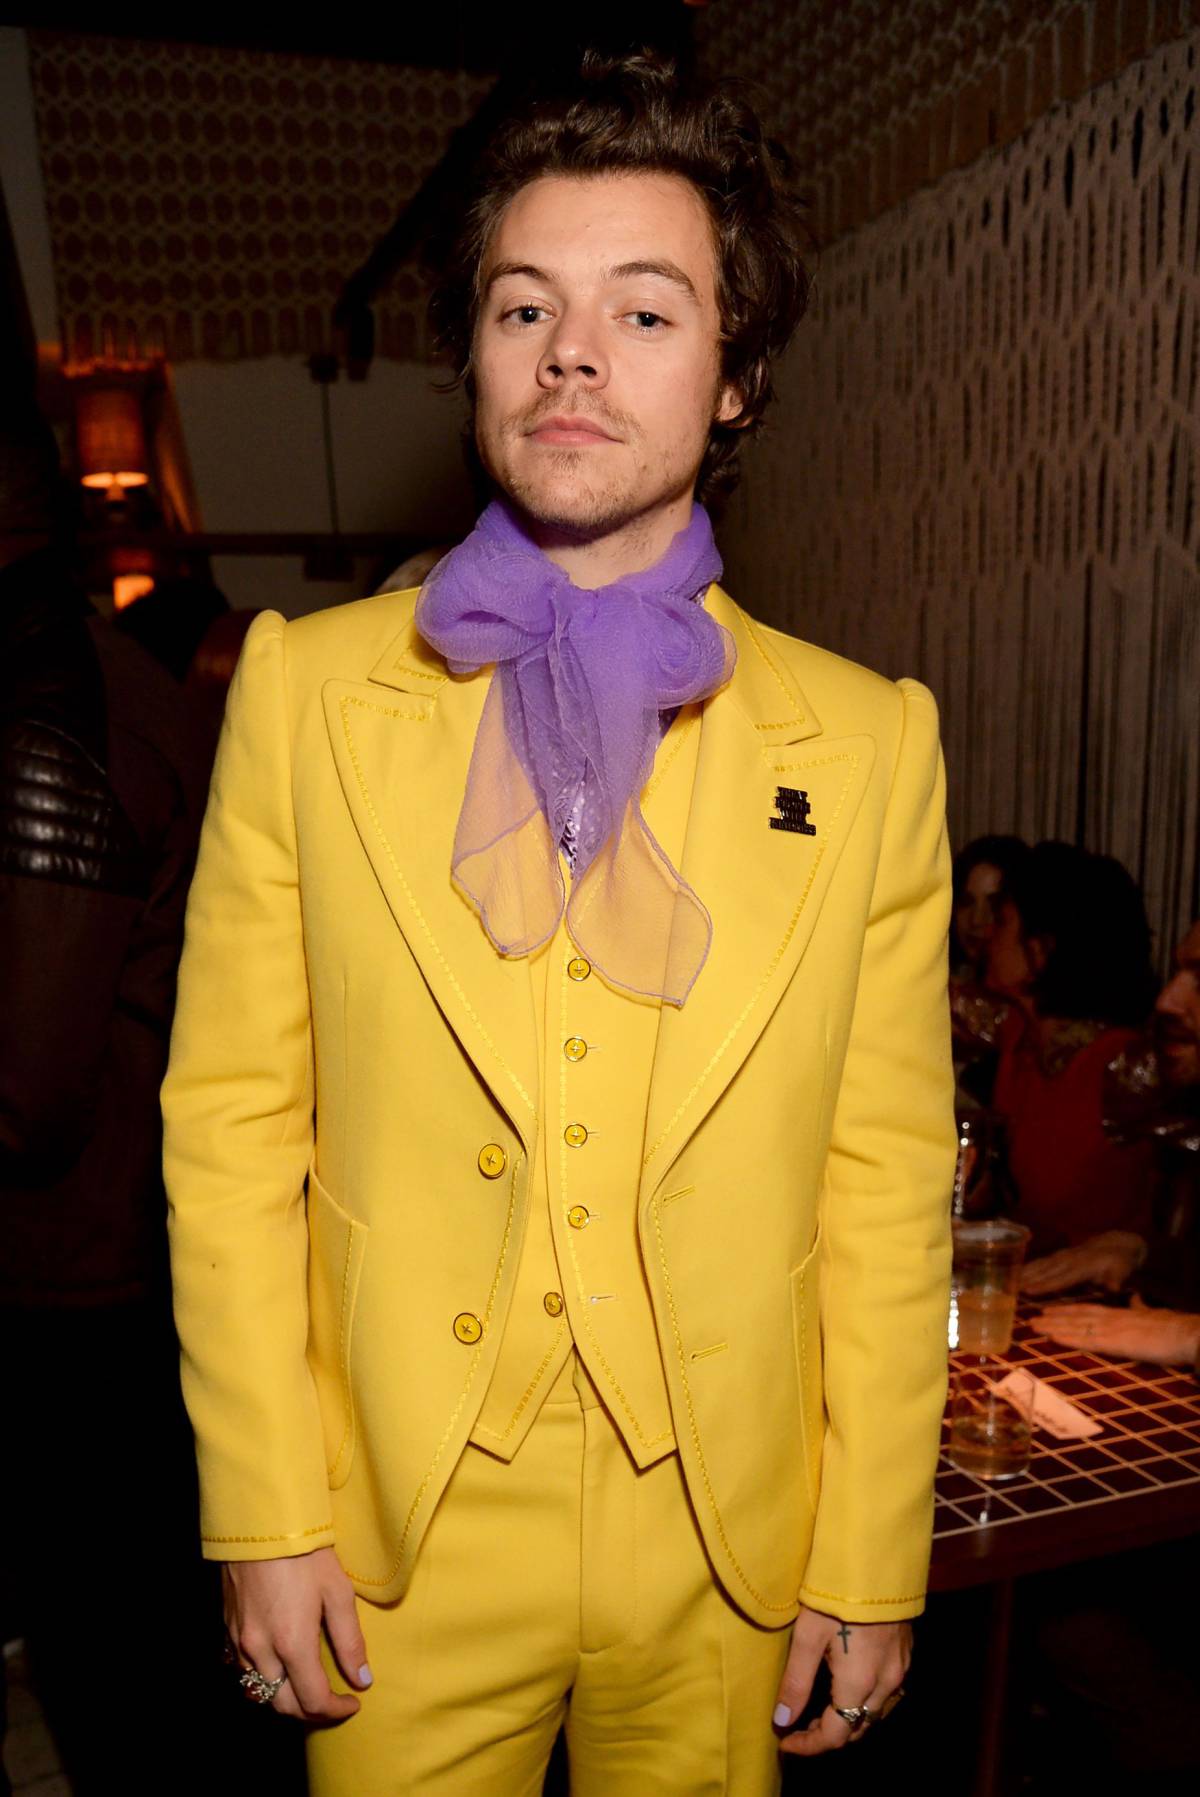 30 Harry Styles Outfits with His Coolest Looks - Outfit Styles